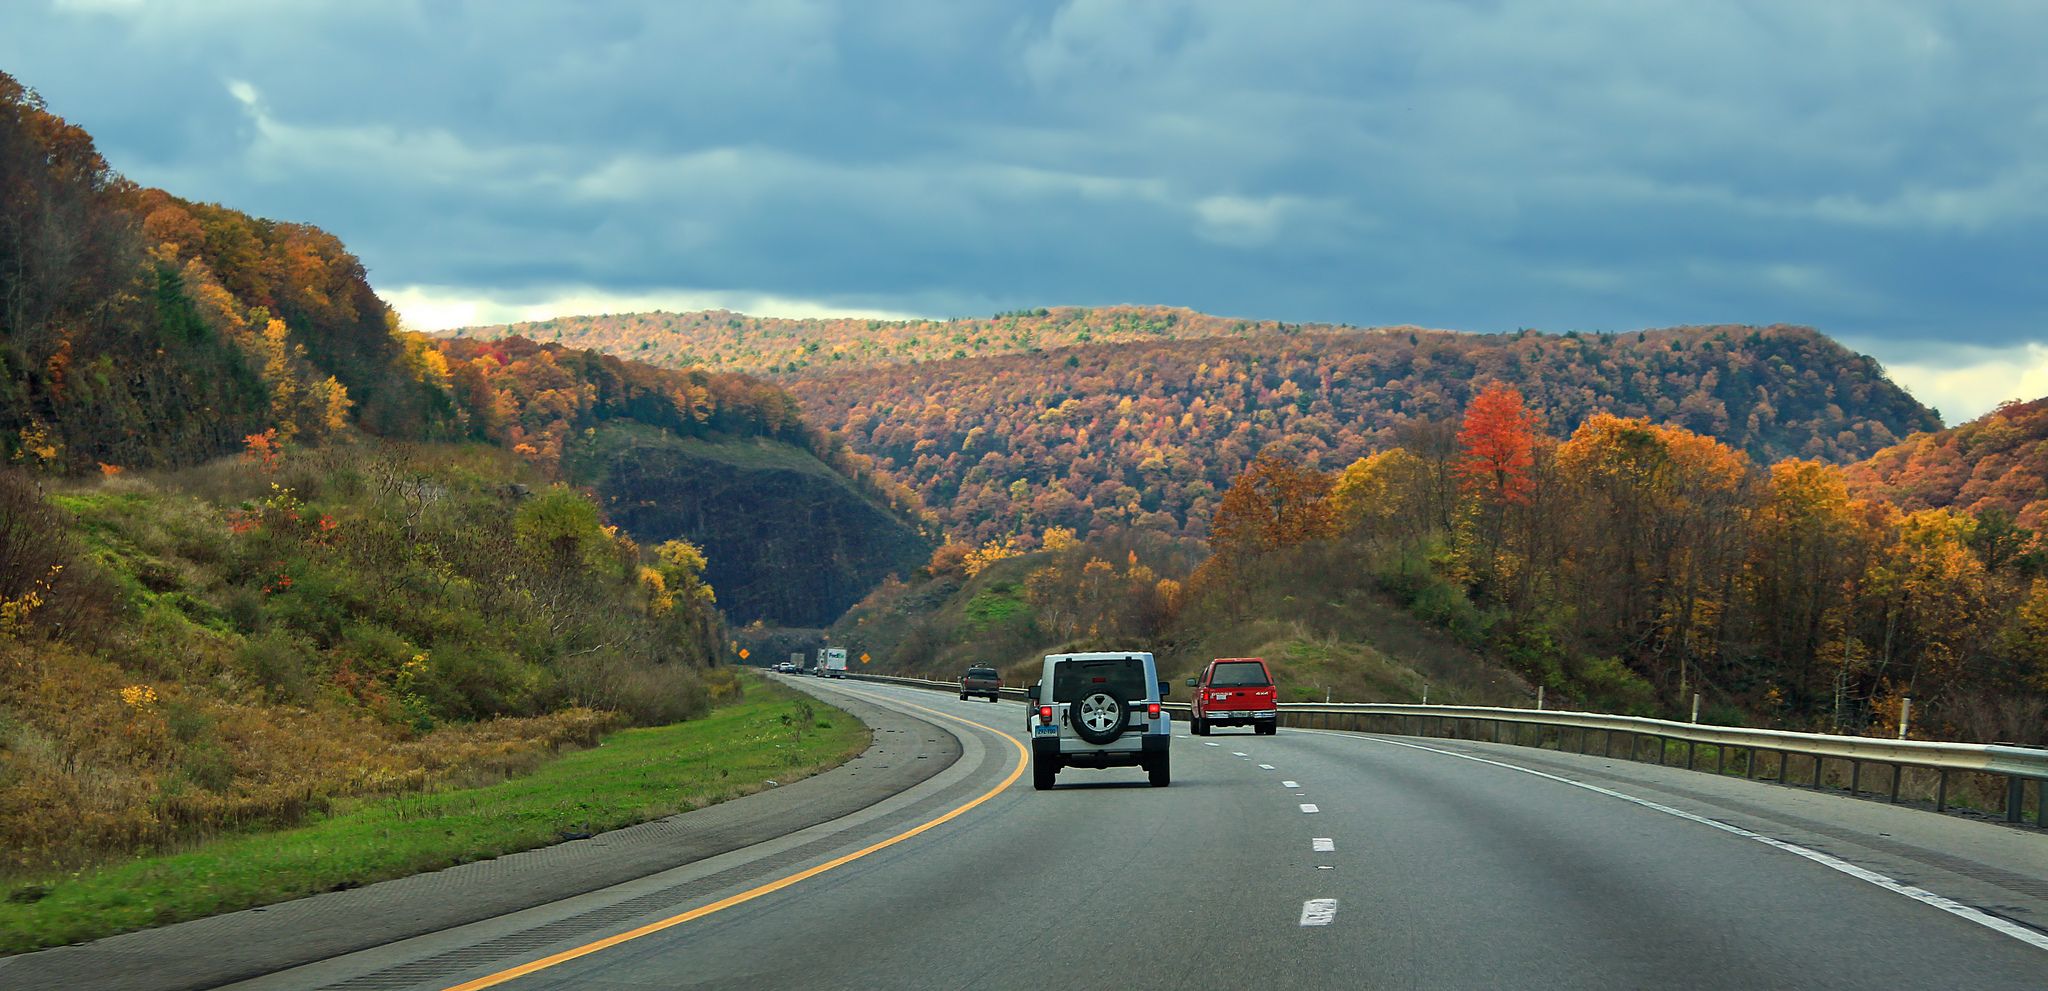 Oil and Gas Production Waste Spread to Deice New York, Pa. Roads With Little Oversight